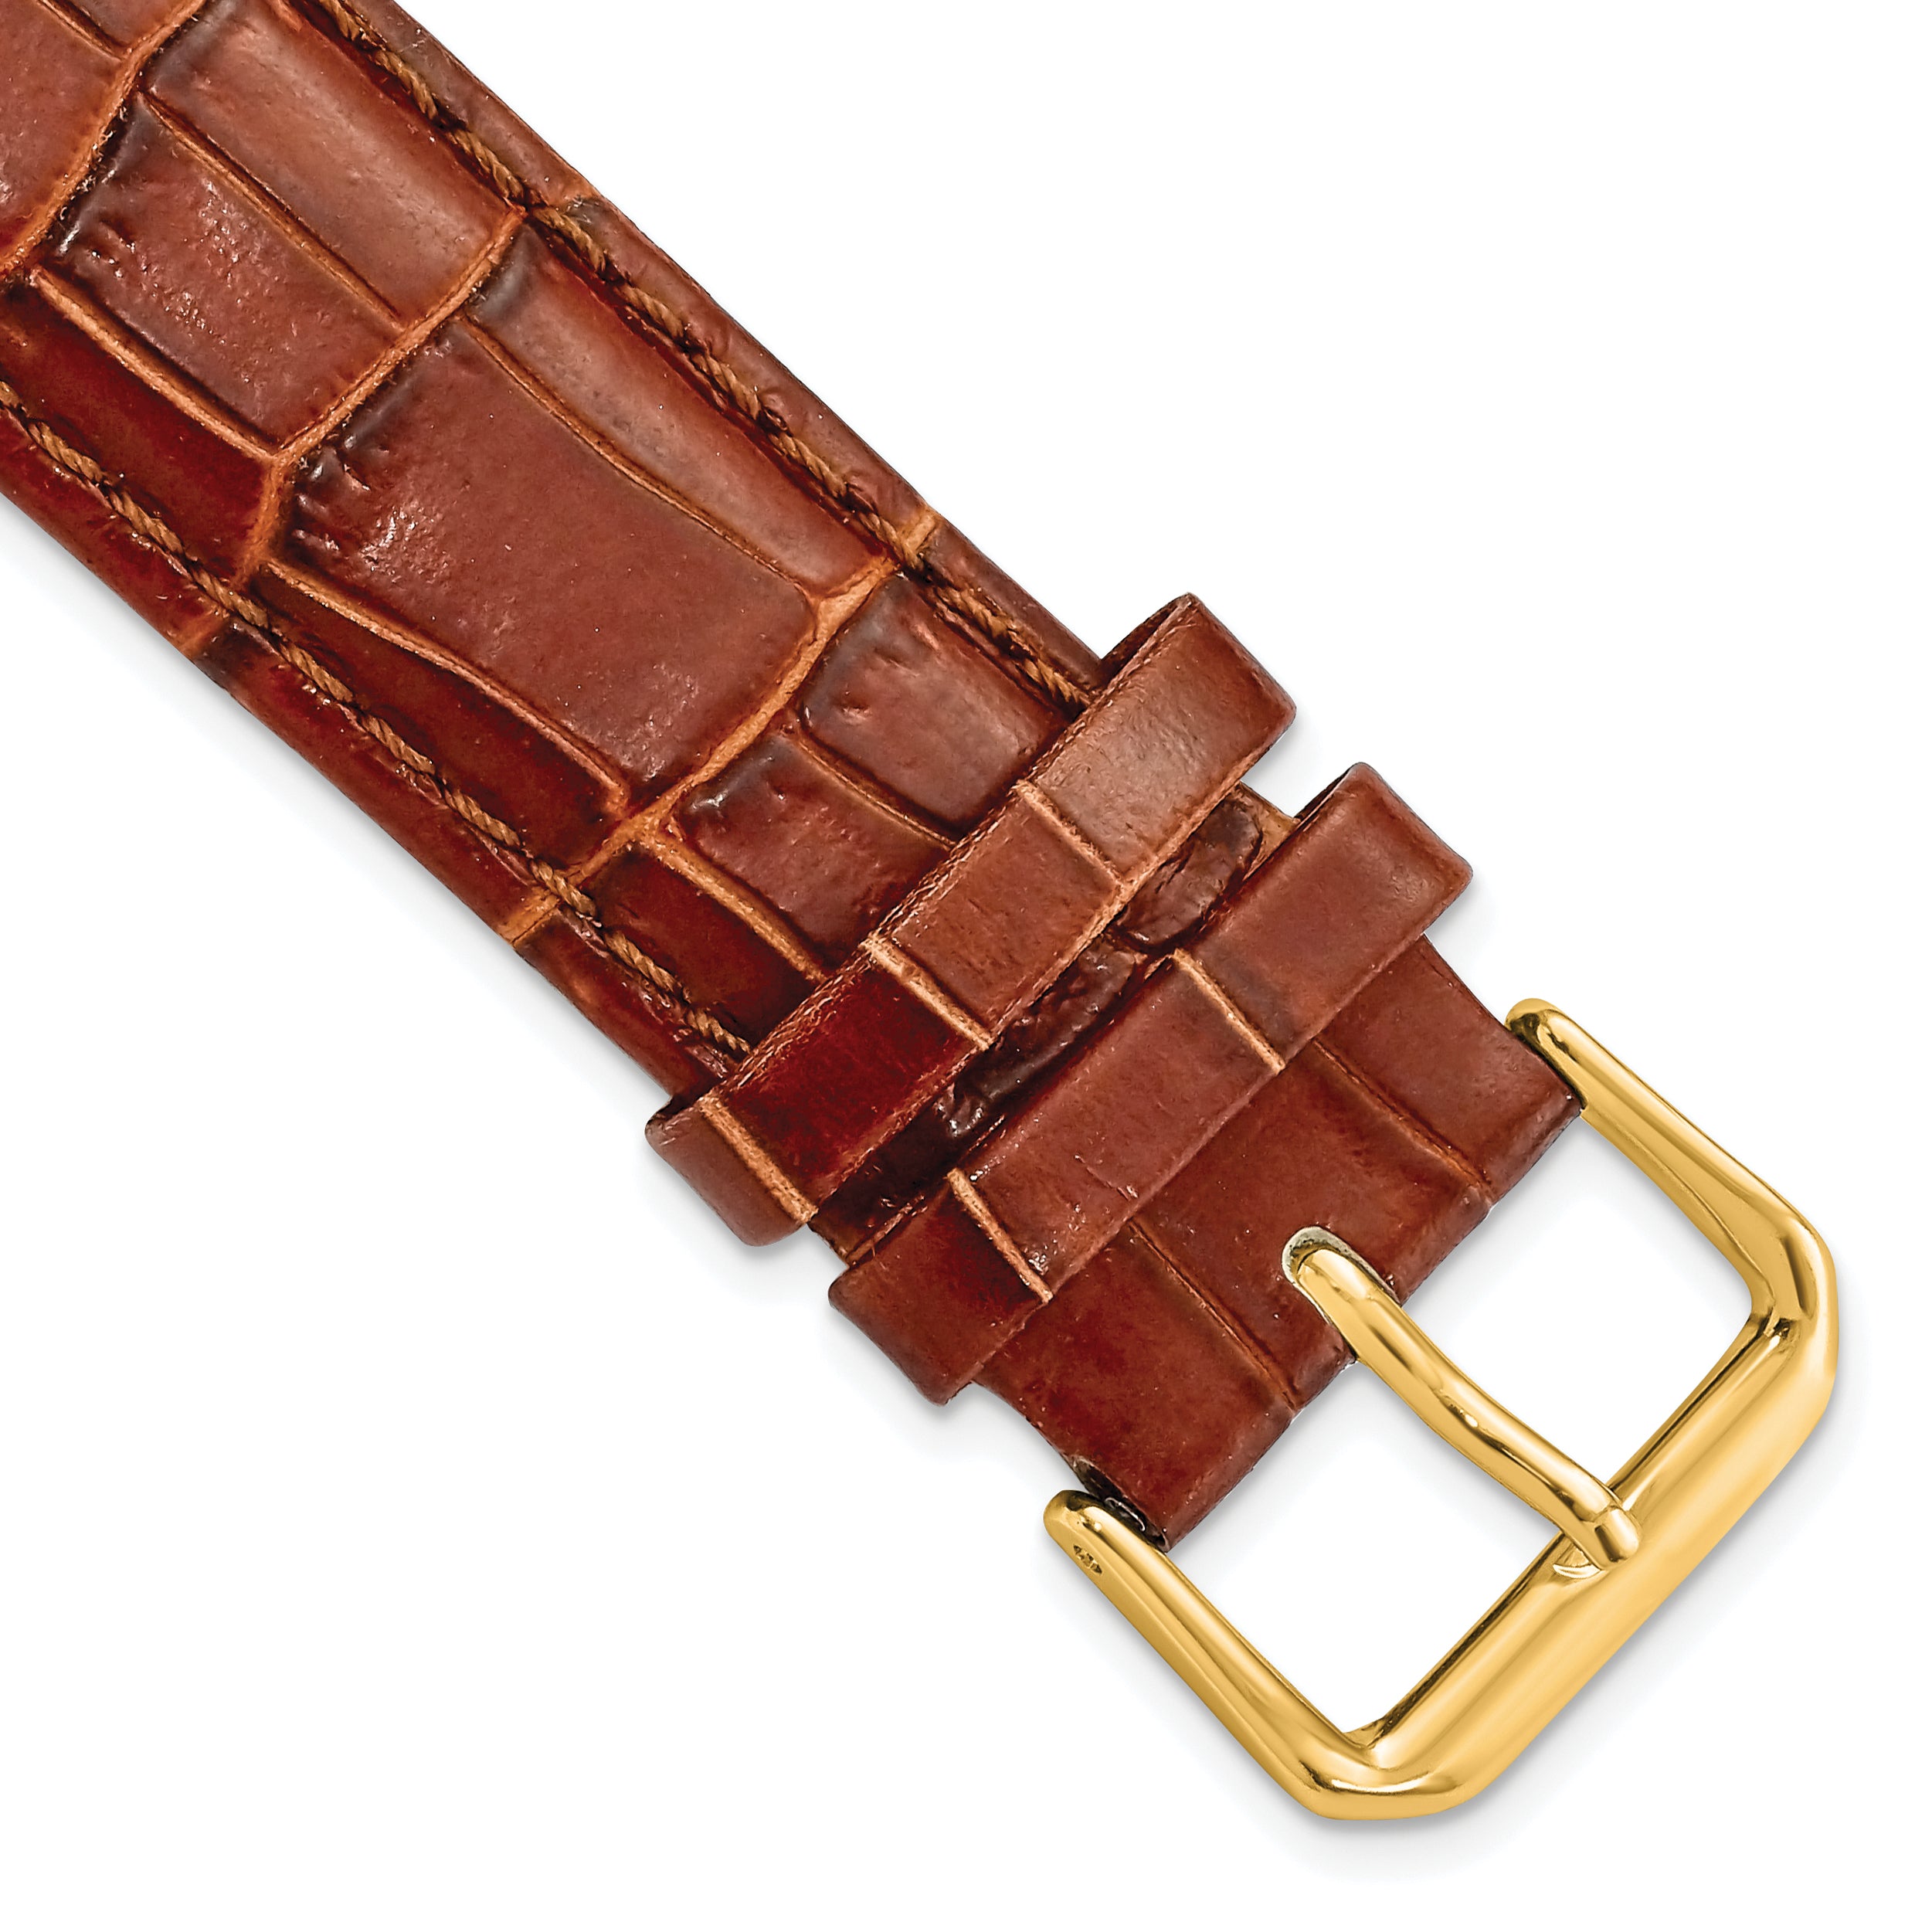 DeBeer 20mm Havana Crocodile Grain Leather with Dark Stitching and Gold-tone Buckle 7.5 inch Watch Band